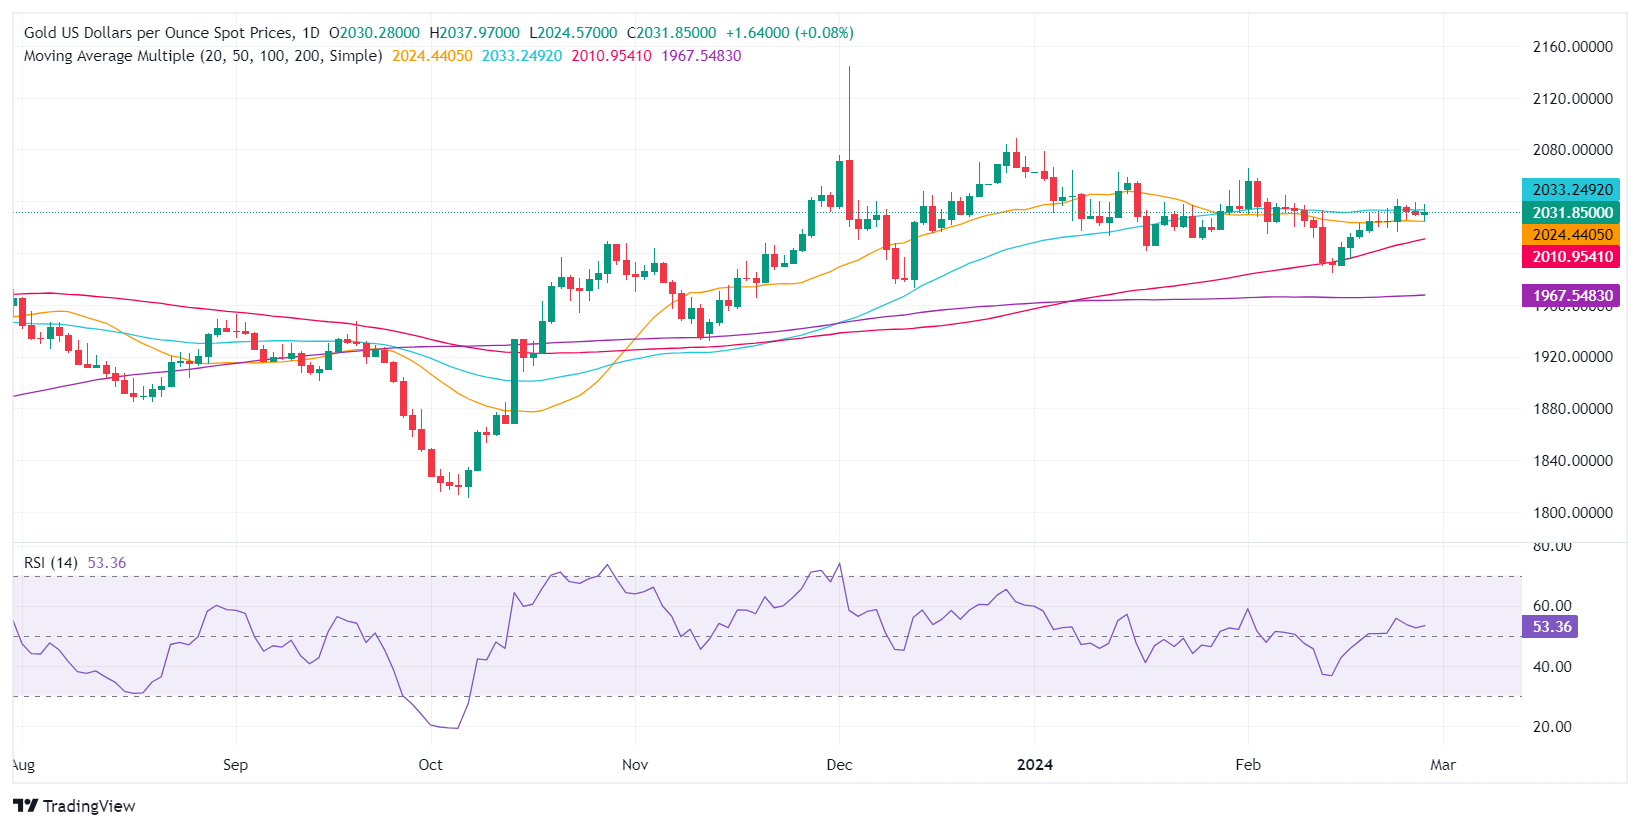 Technical analysis: Gold stays firm, fluctuating near the 50-day SMA